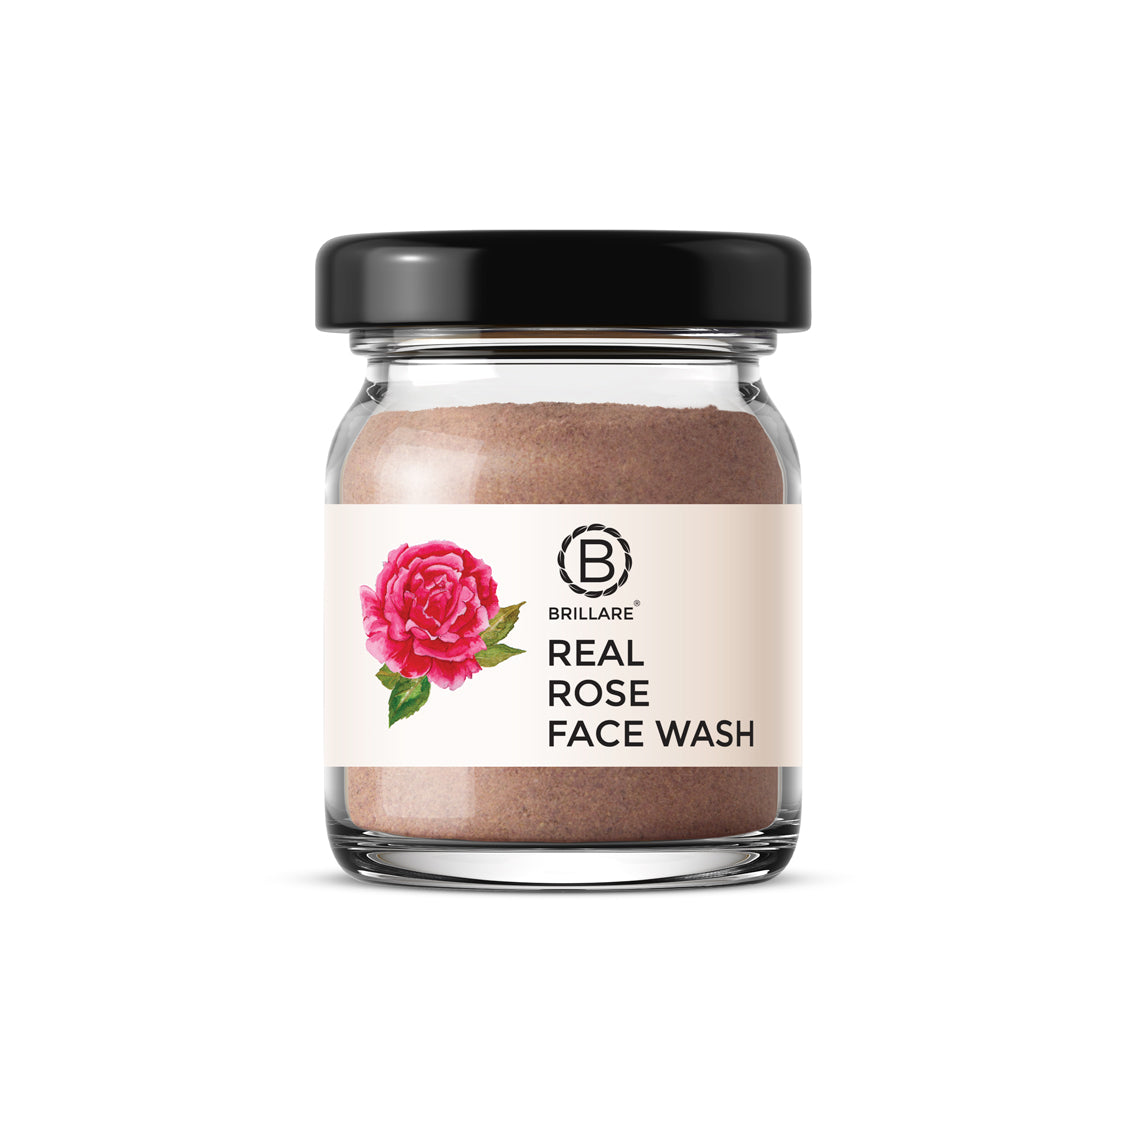 Real Rose Powder Face Wash For Young, Hydrated Skin